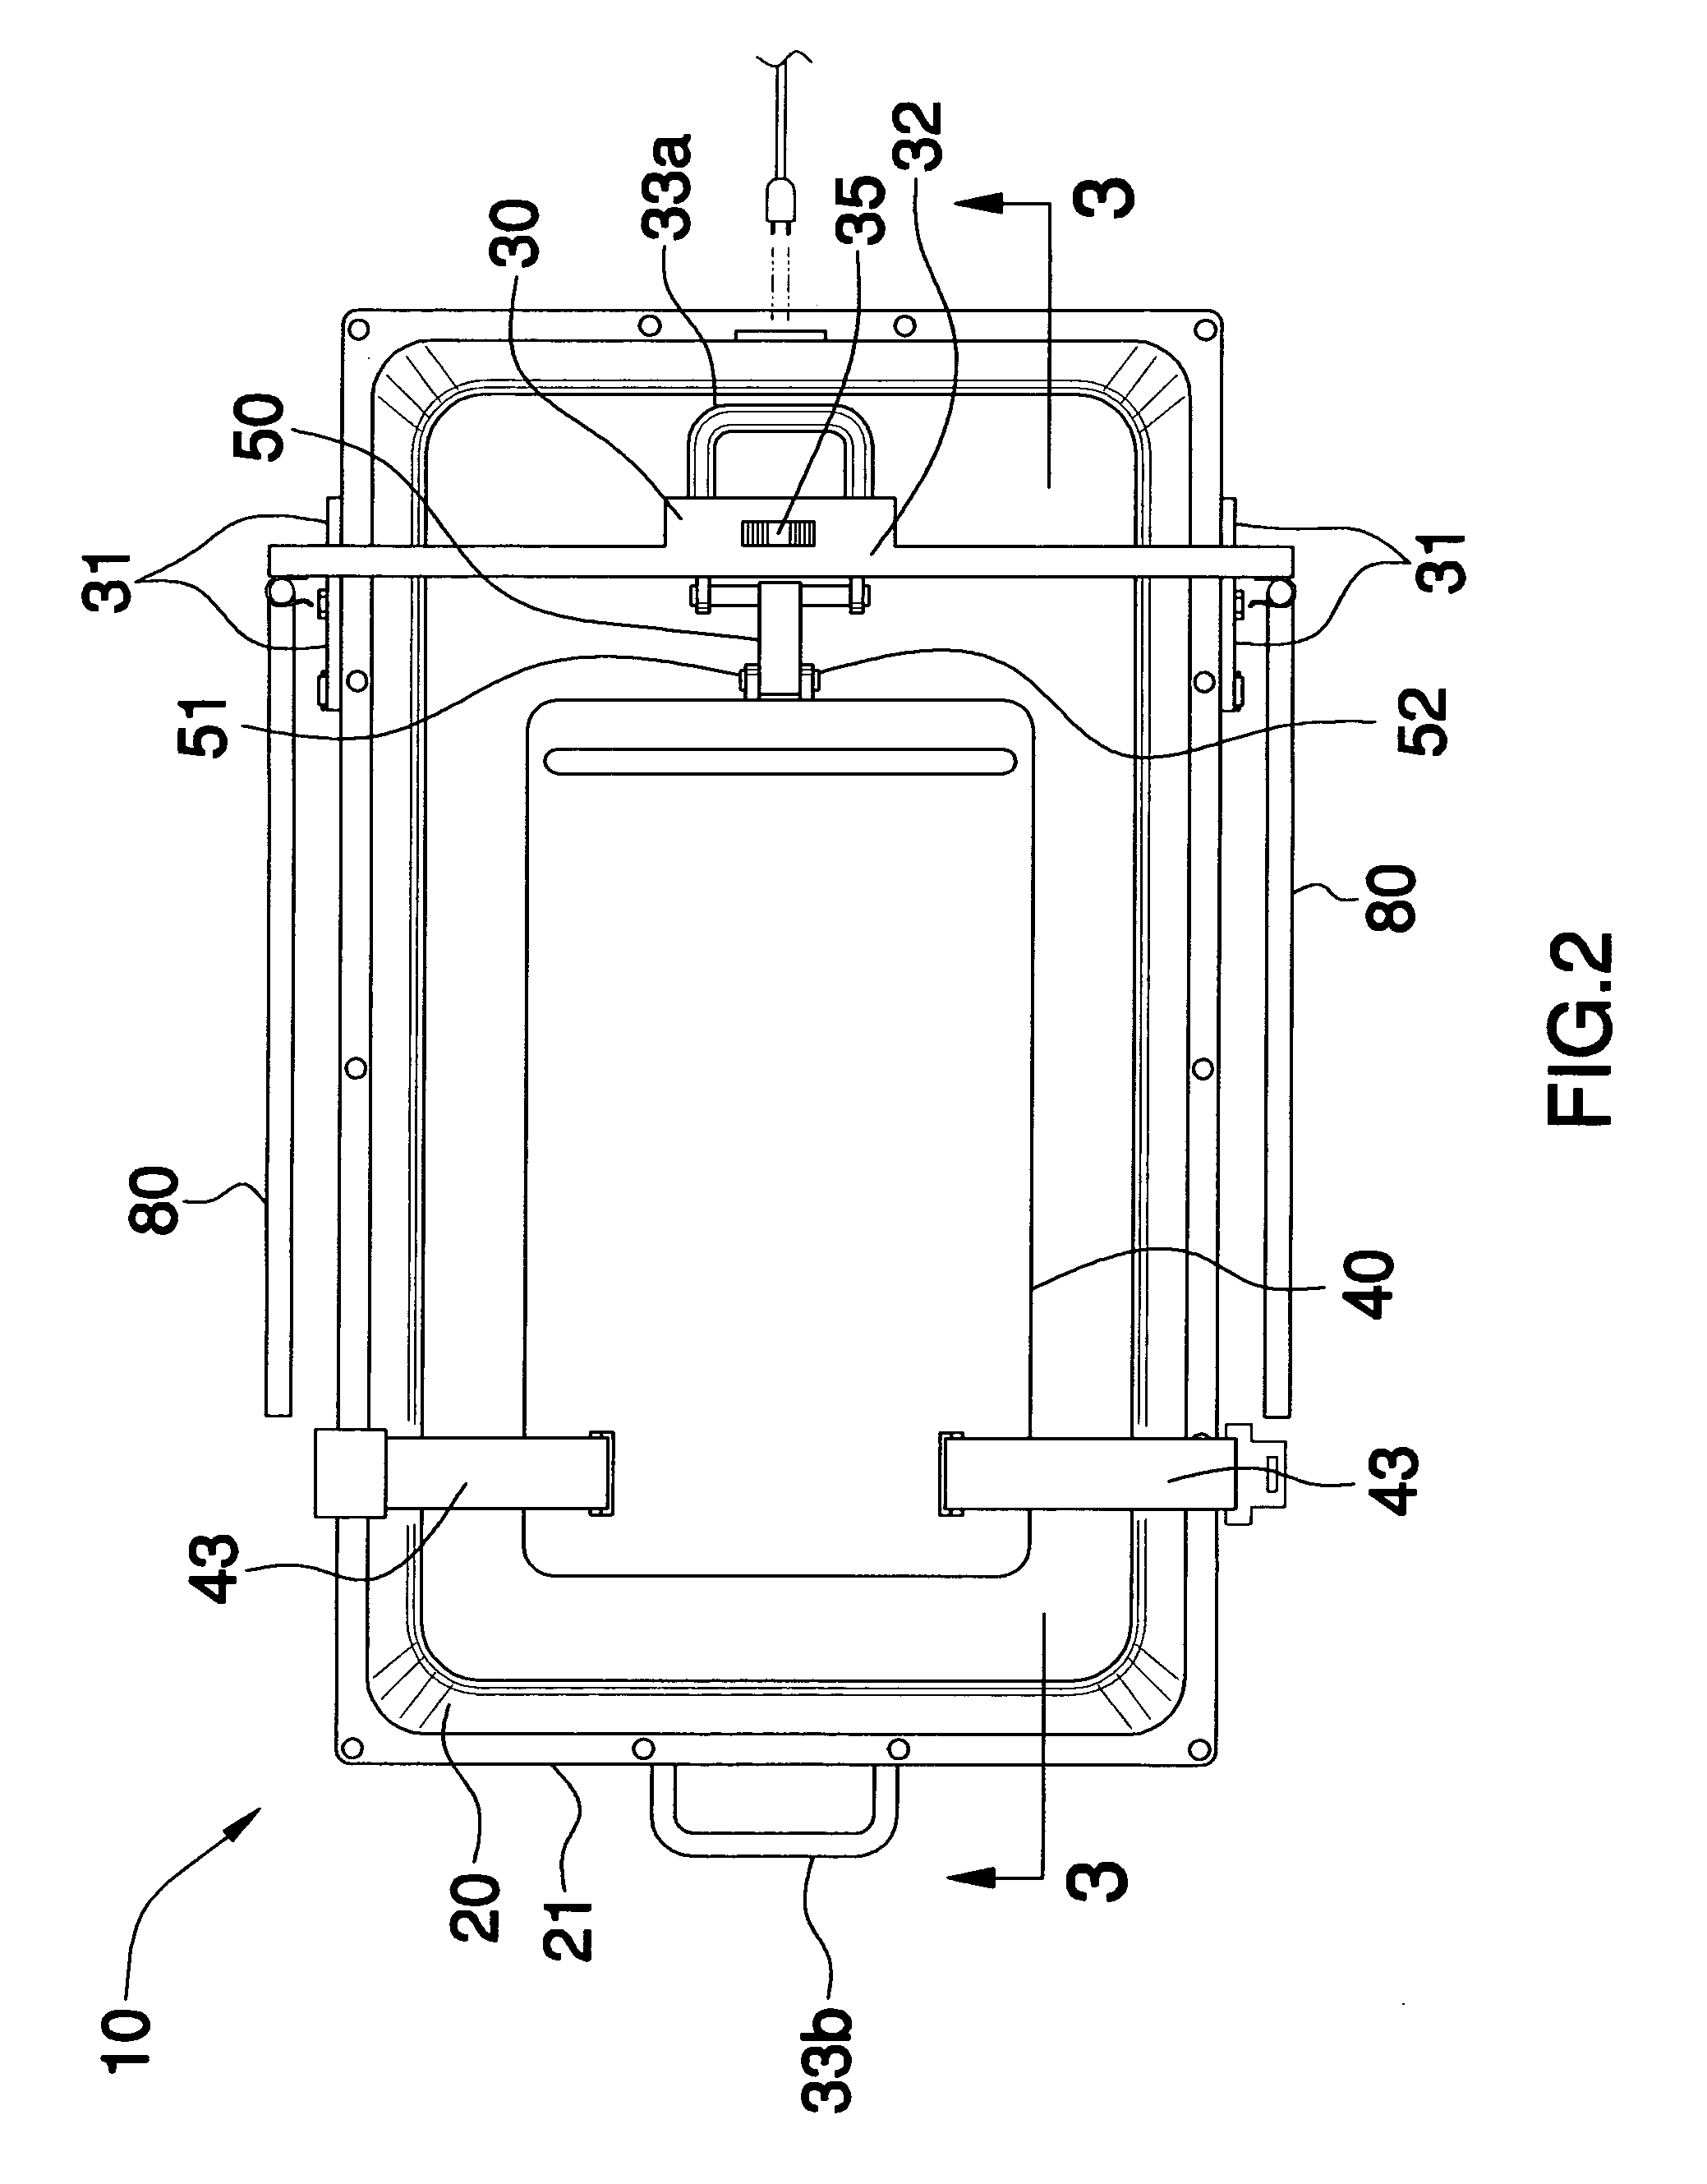 Infant car seat assembly for simulating a mobile vehicle